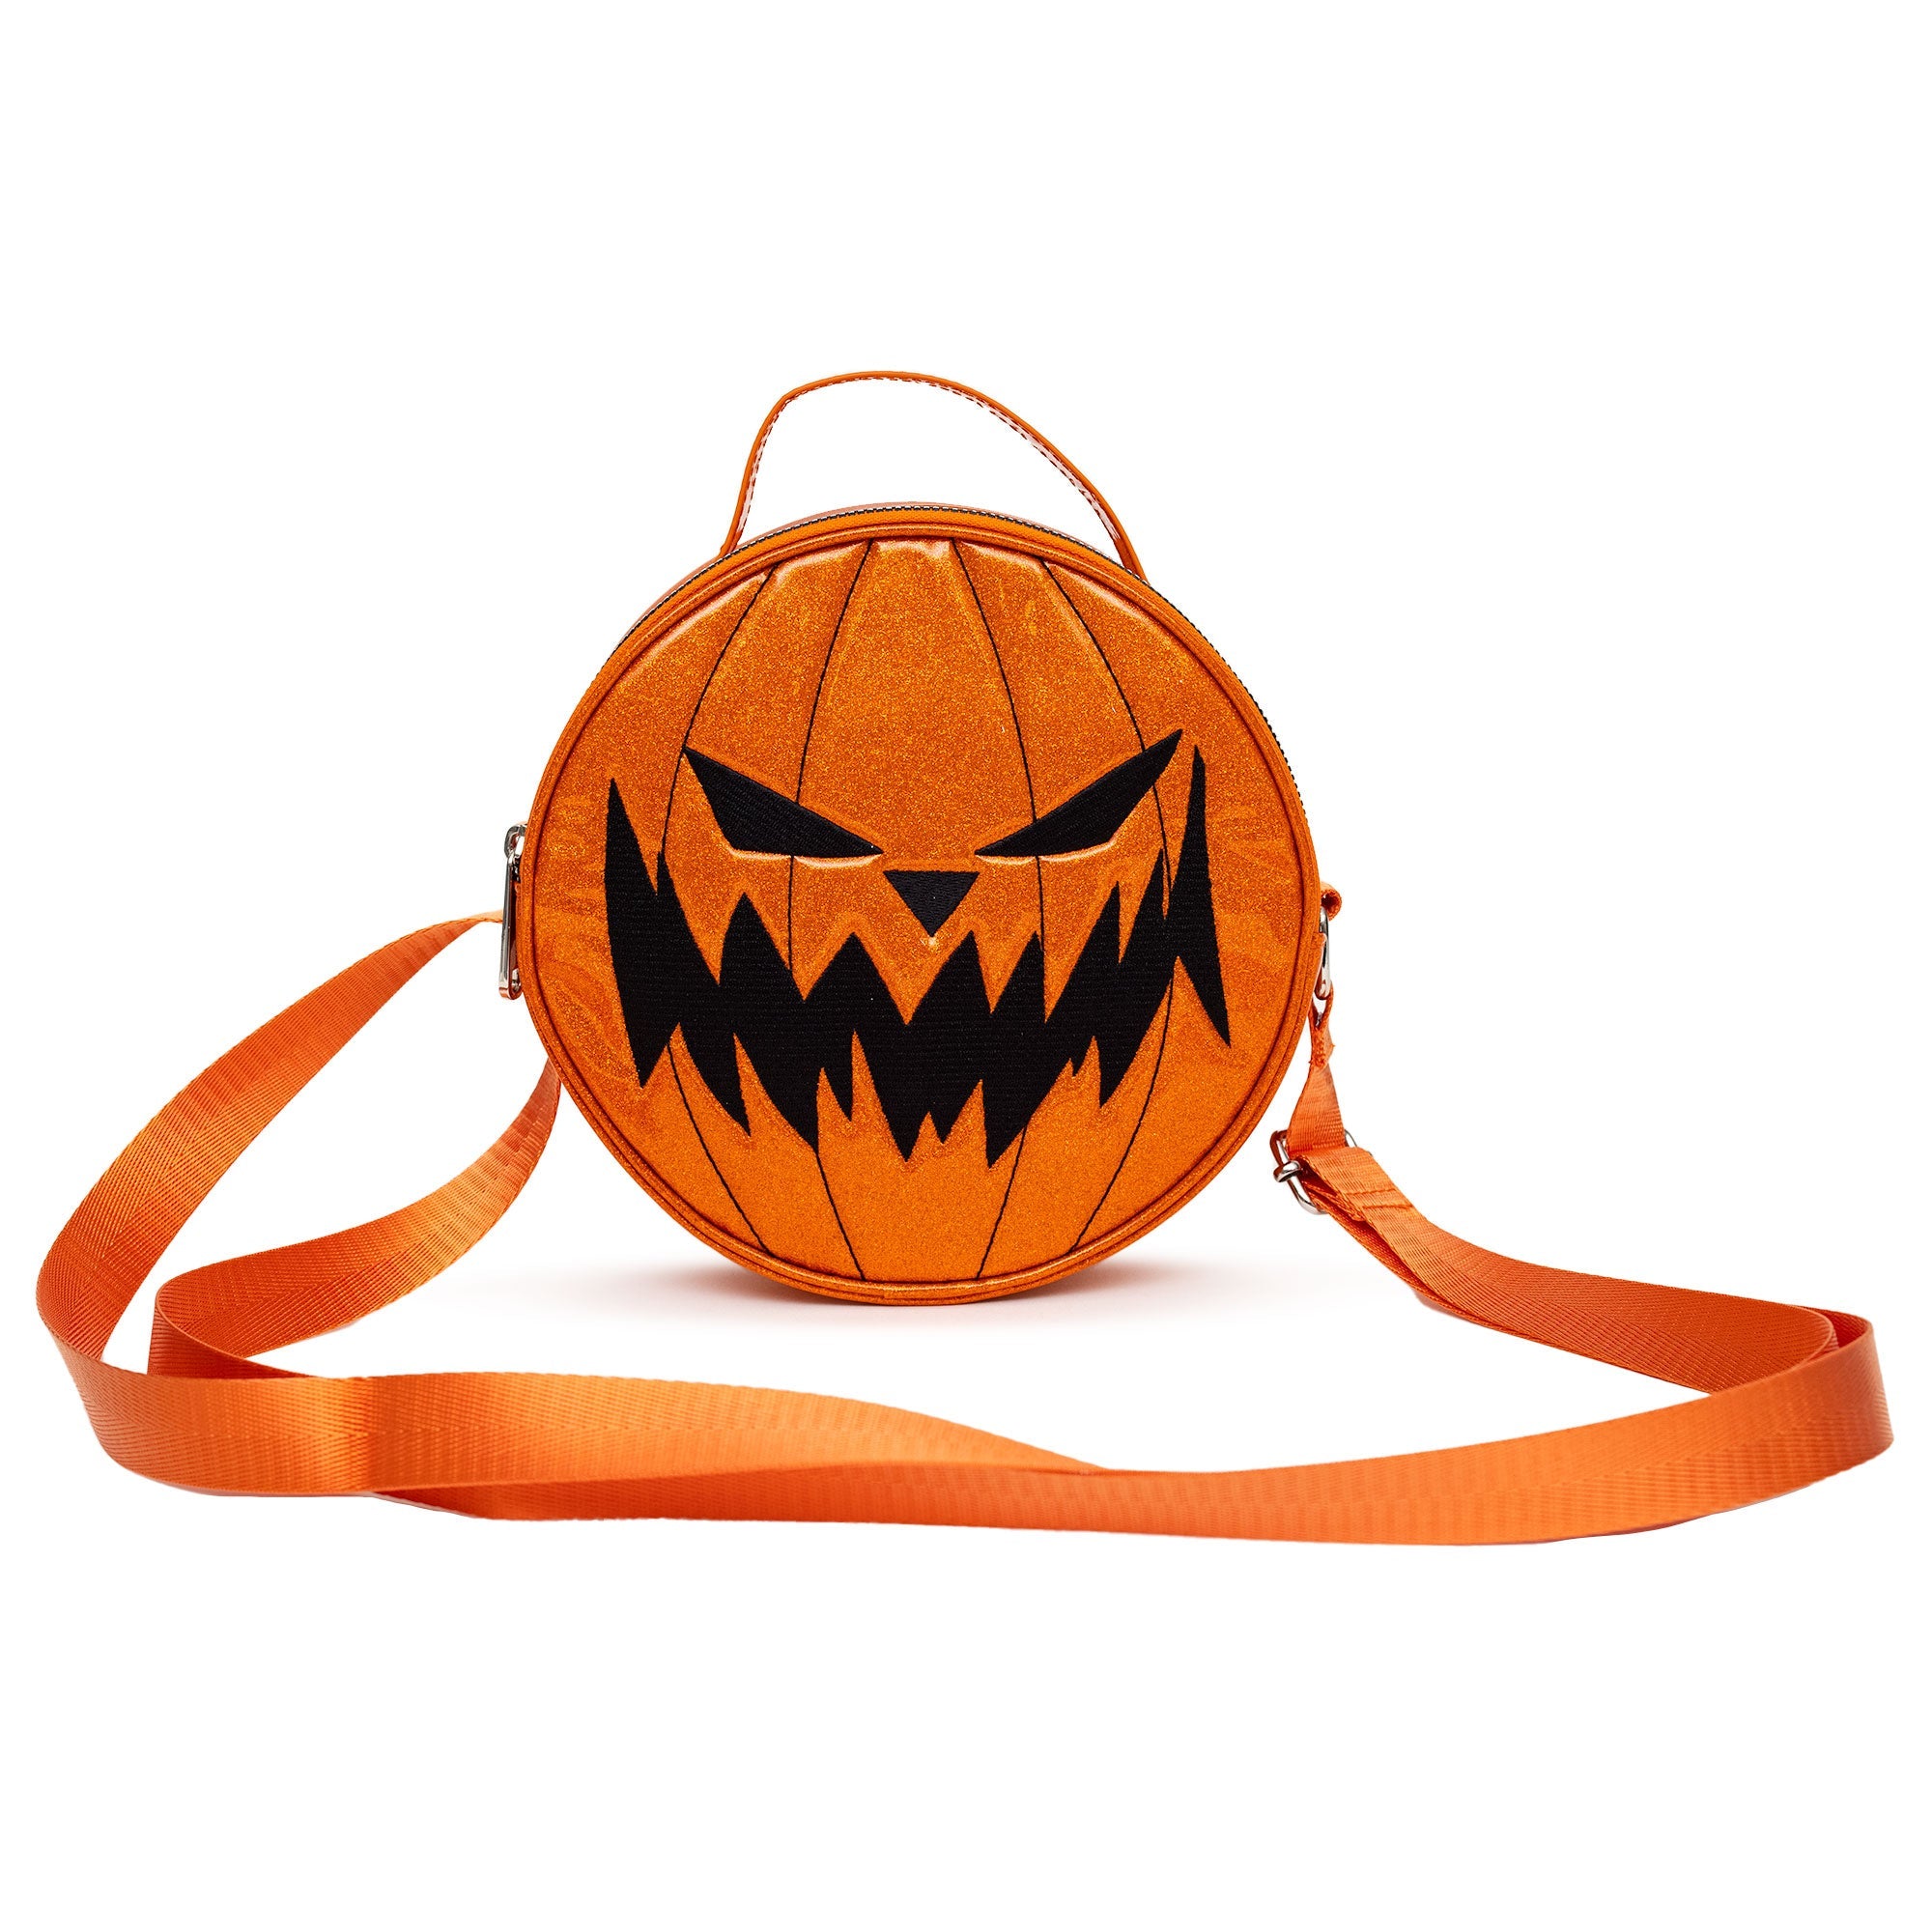 Cat & Pumpkin Bag with Personalized Imprint | Halloween Promos